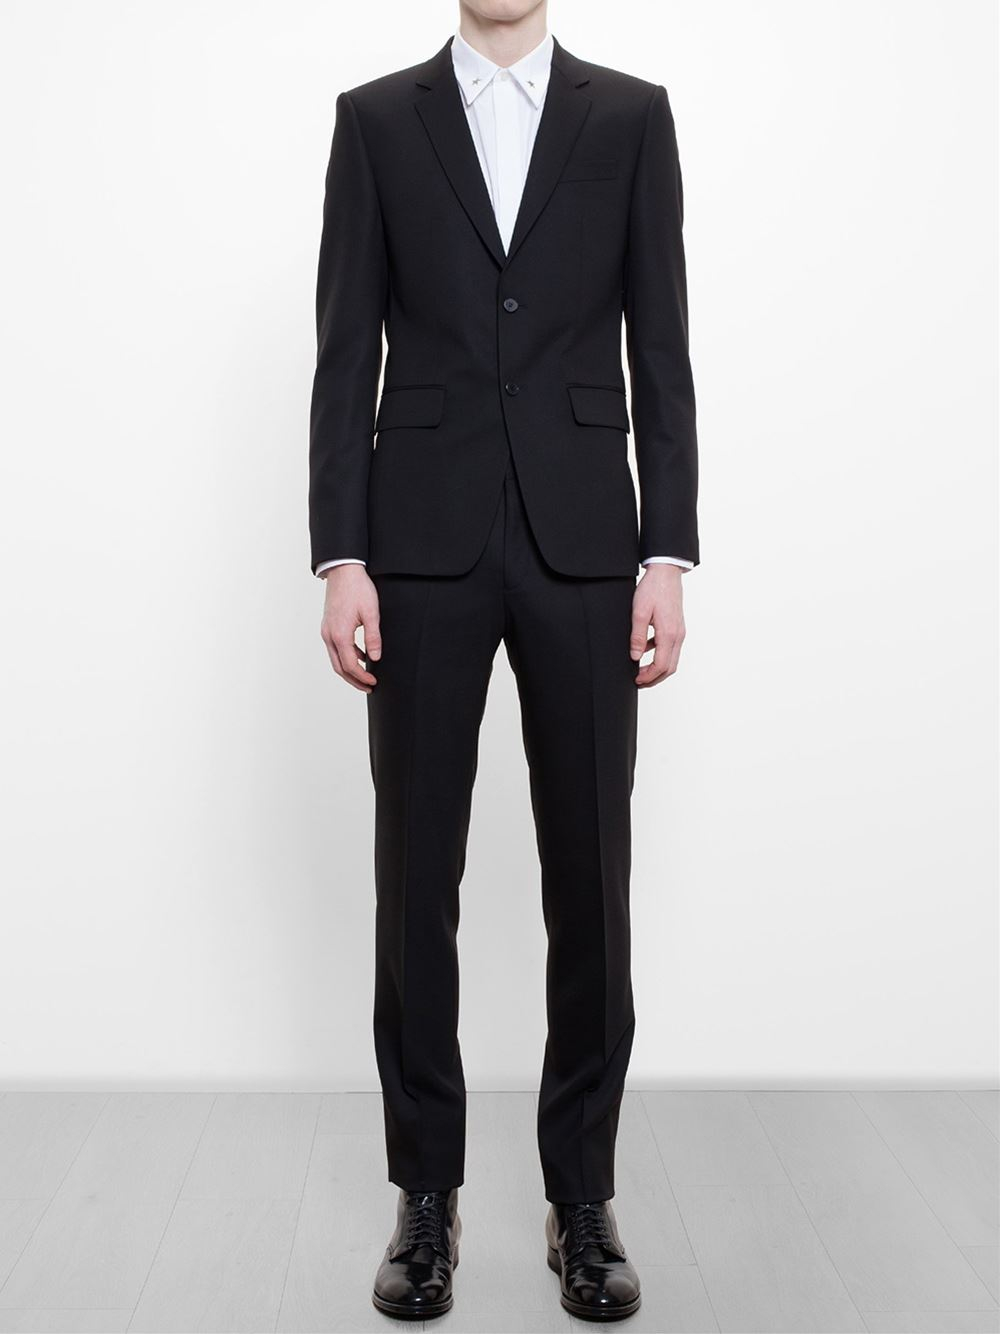 Lyst - Givenchy Classic Slim Suit in Black for Men